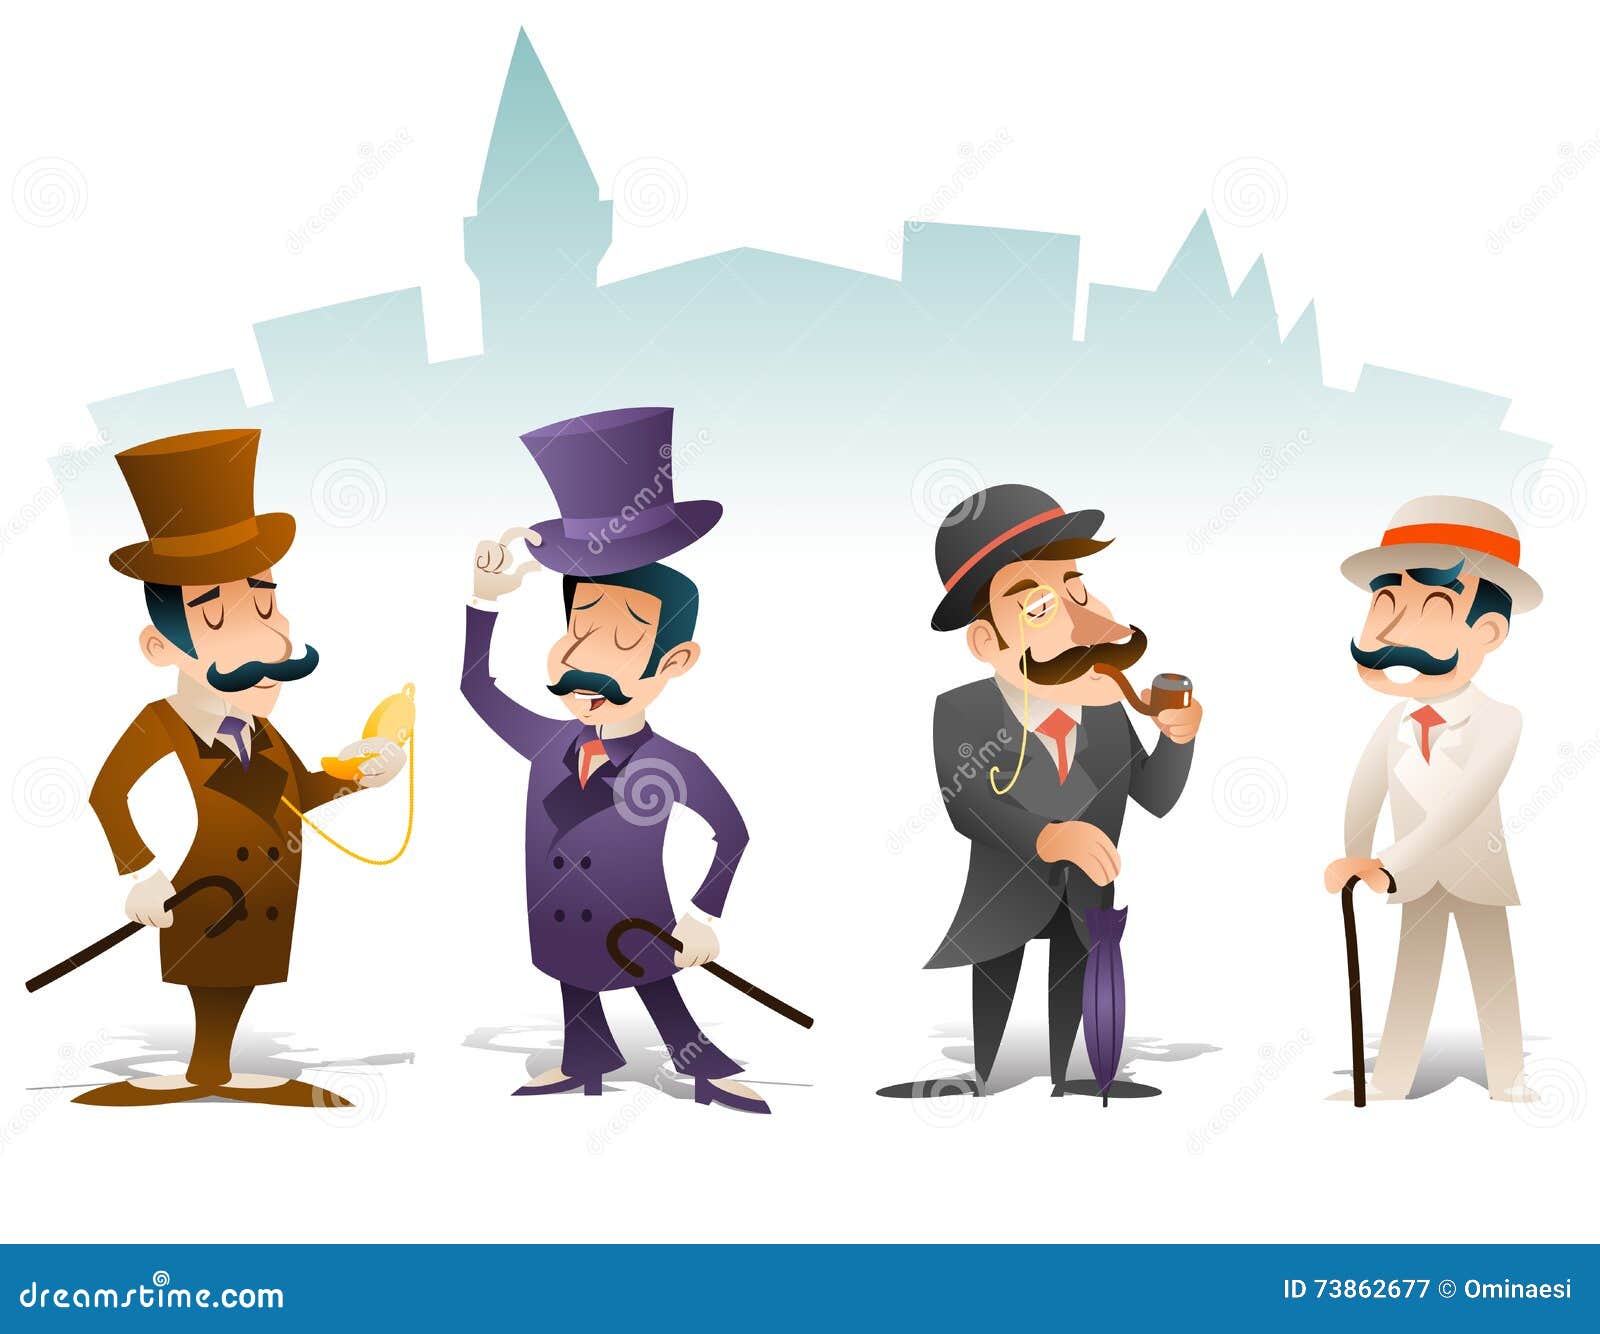 business victorian gentleman meeting cartoon character icon set english great britain city background retro vintage